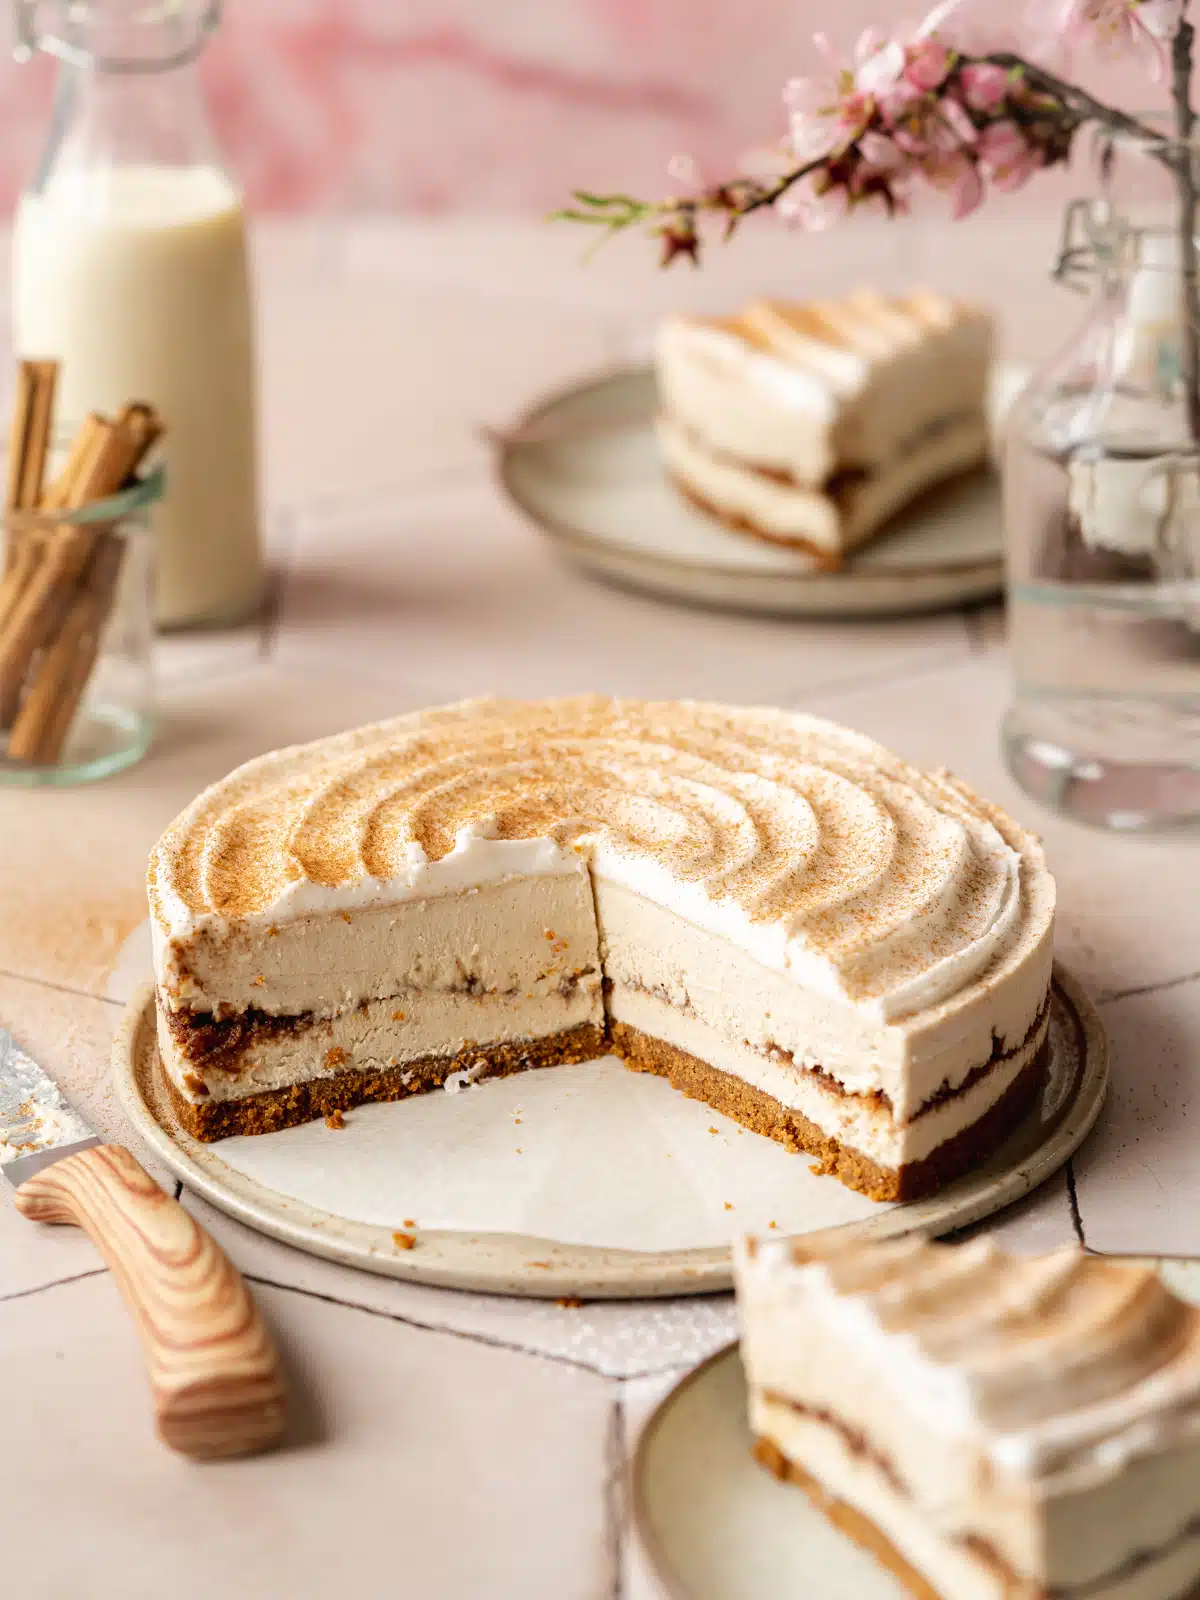 45 degree angle shot of vegan cinnamon roll cheesecake with two slices taken out, one placed on a plate in the foreground and one on a plate in the background with a glass jug of nut milk to the side.